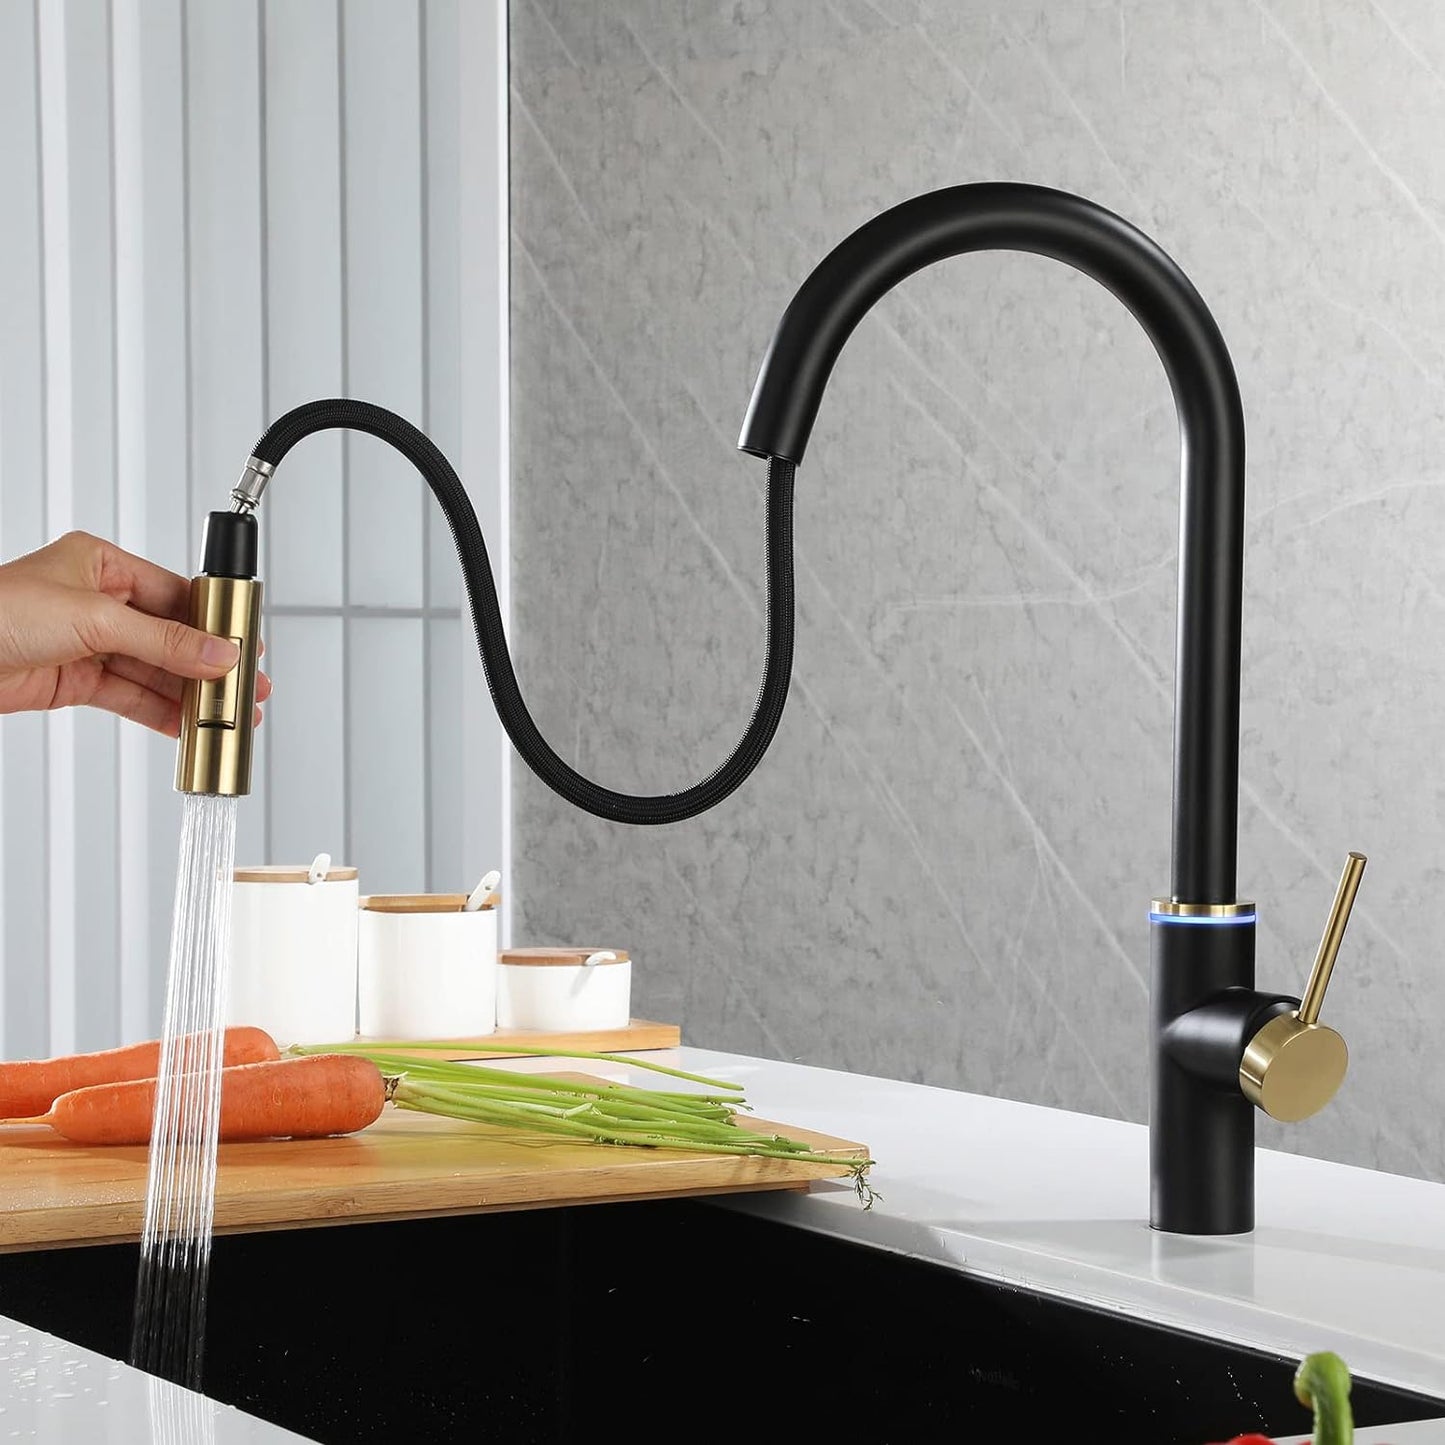 A|M Aquae Touch Kitchen Faucet with LED Light  Black Gold, Faucet for Kitchen Sink